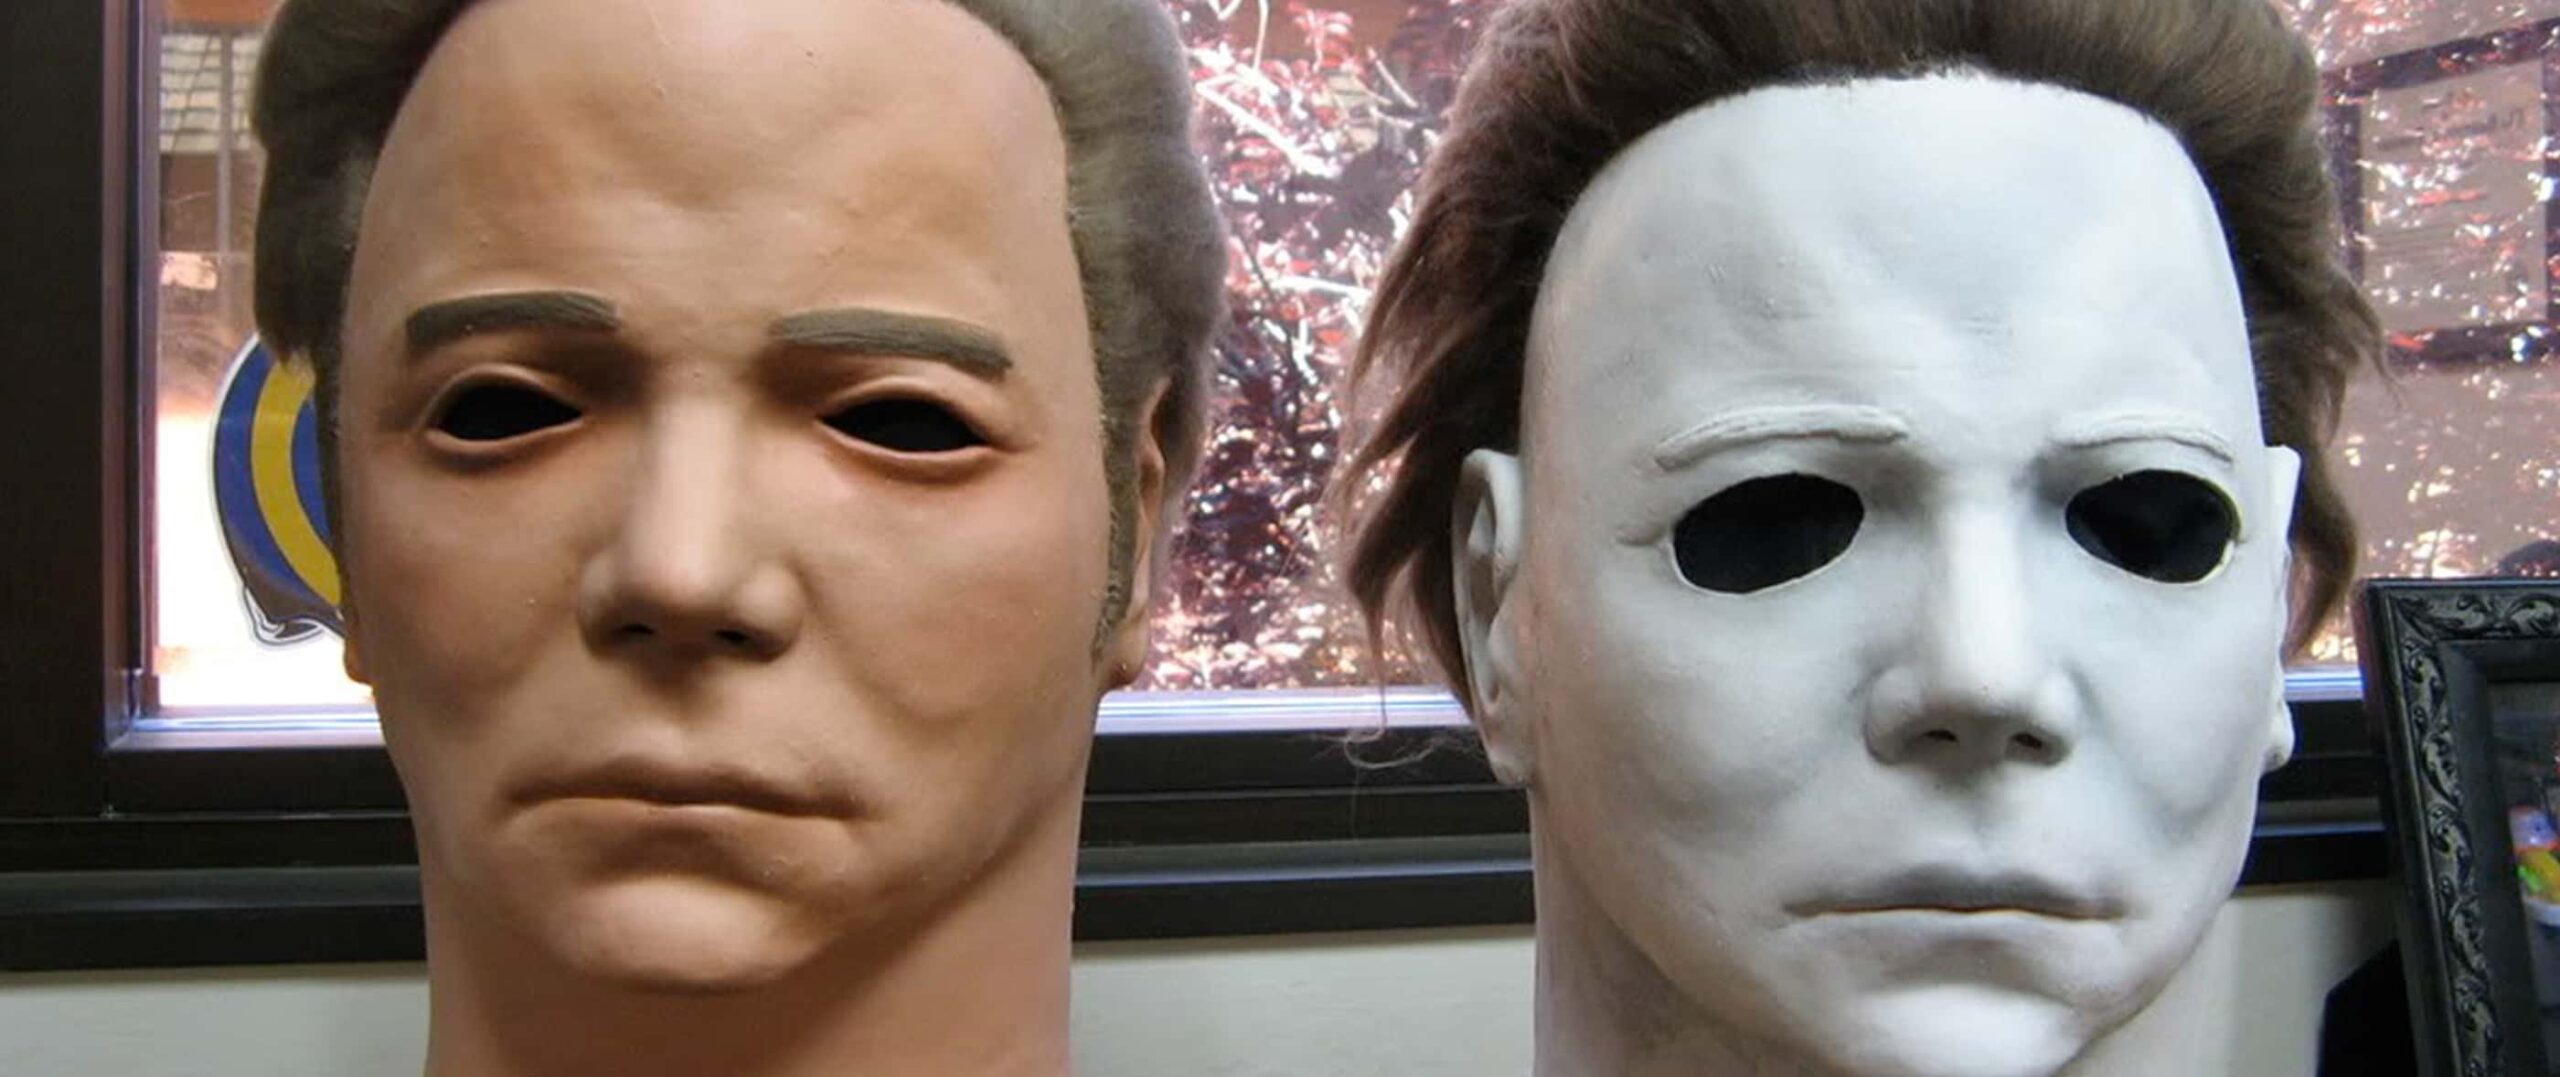 42 Disturbed Facts About Halloween's Michael Myers, The Original Slasher